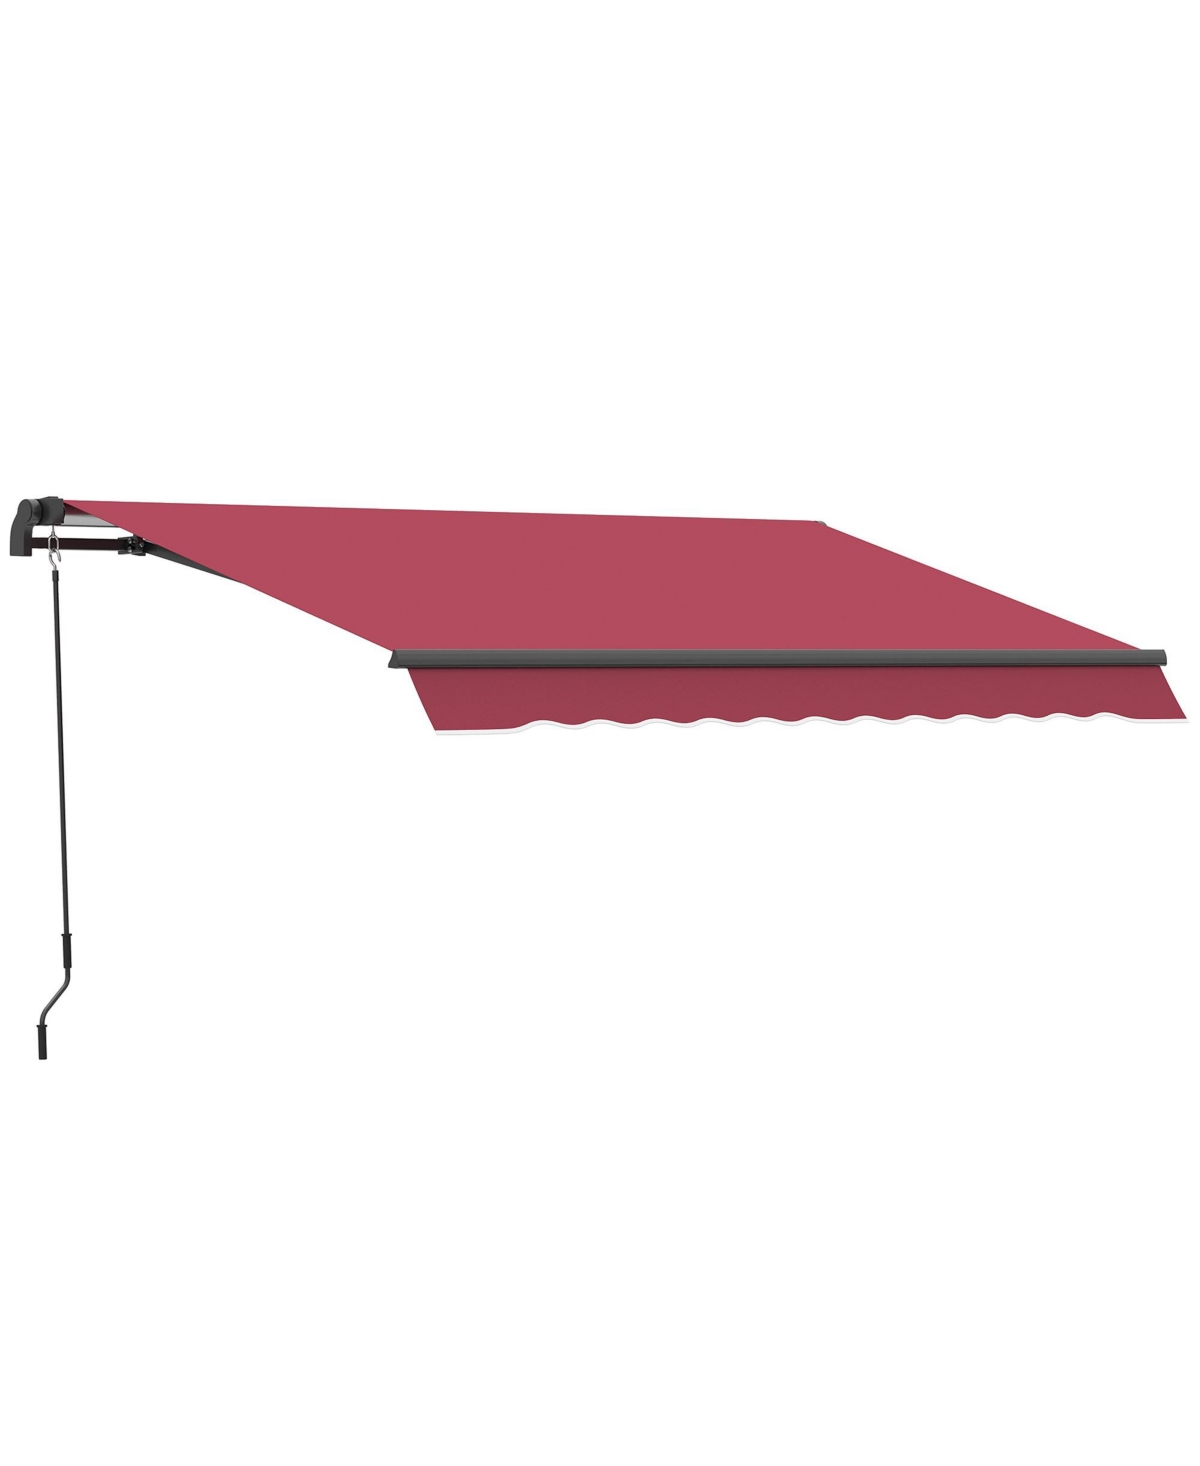 10' x 8' Manual Retractable Awning Sun Shade Shelter for Patio Deck Yard with Uv Protection and Easy Crank Opening, Red - Red